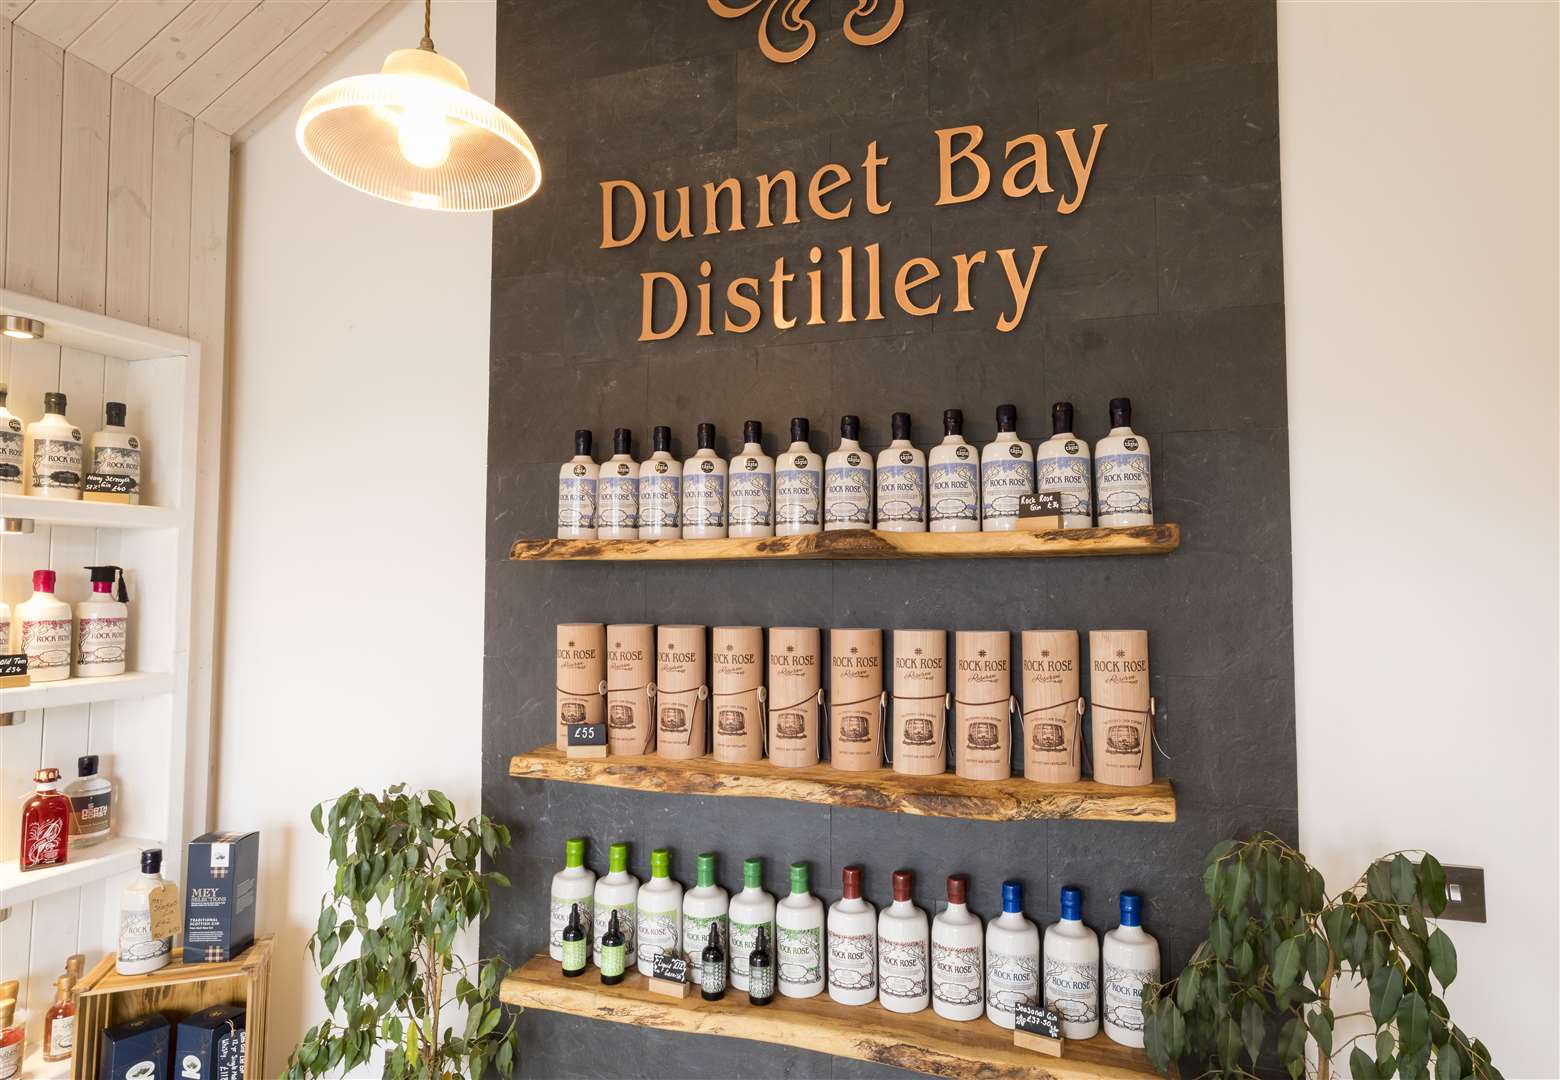 The exhibition is being held at Dunnet Bay Distillery until March.